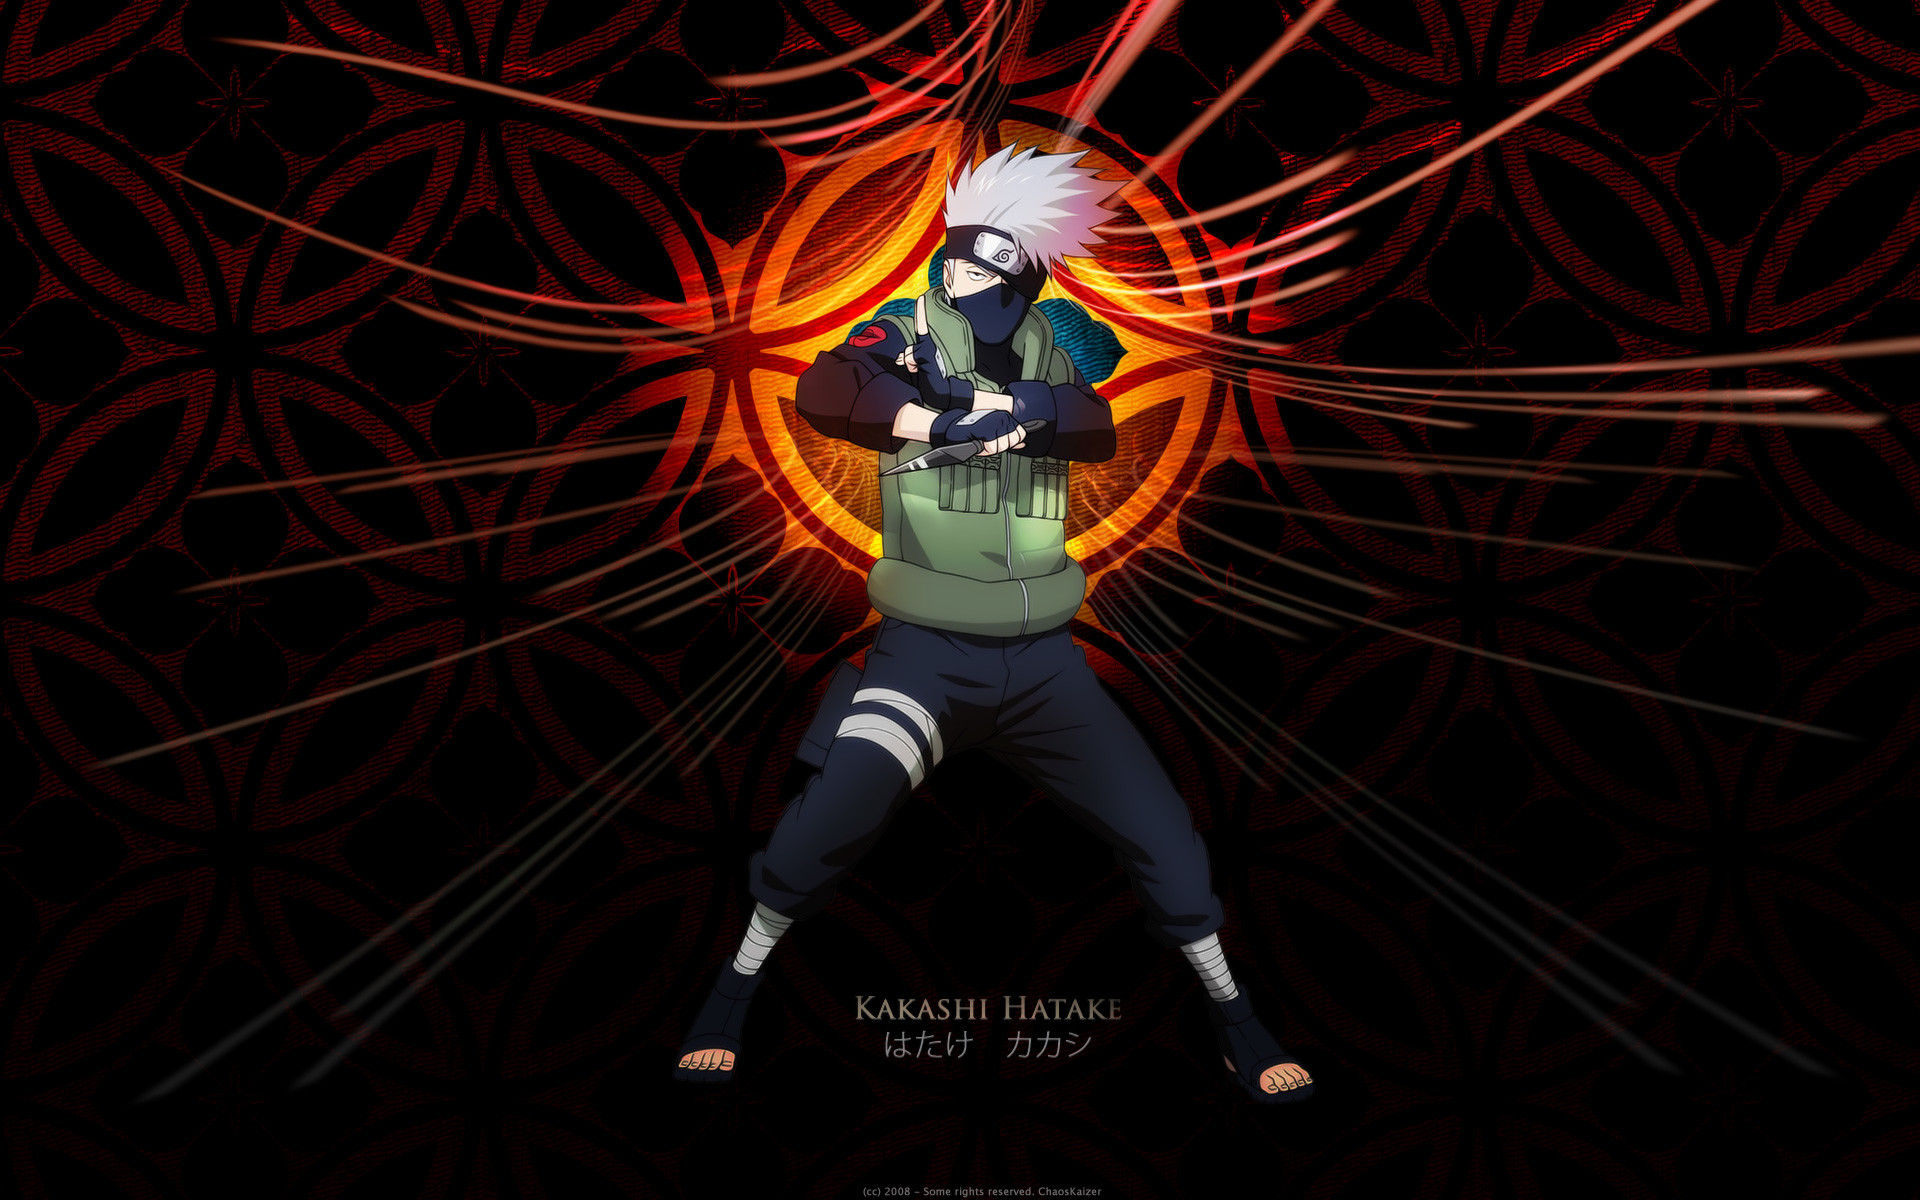 Featured image of post Anime Naruto Kakashi Kakashi Wallpaper 4K - Ultra hd 4k naruto wallpapers for desktop, pc, laptop, iphone, android phone, smartphone, imac, macbook, tablet, mobile device.